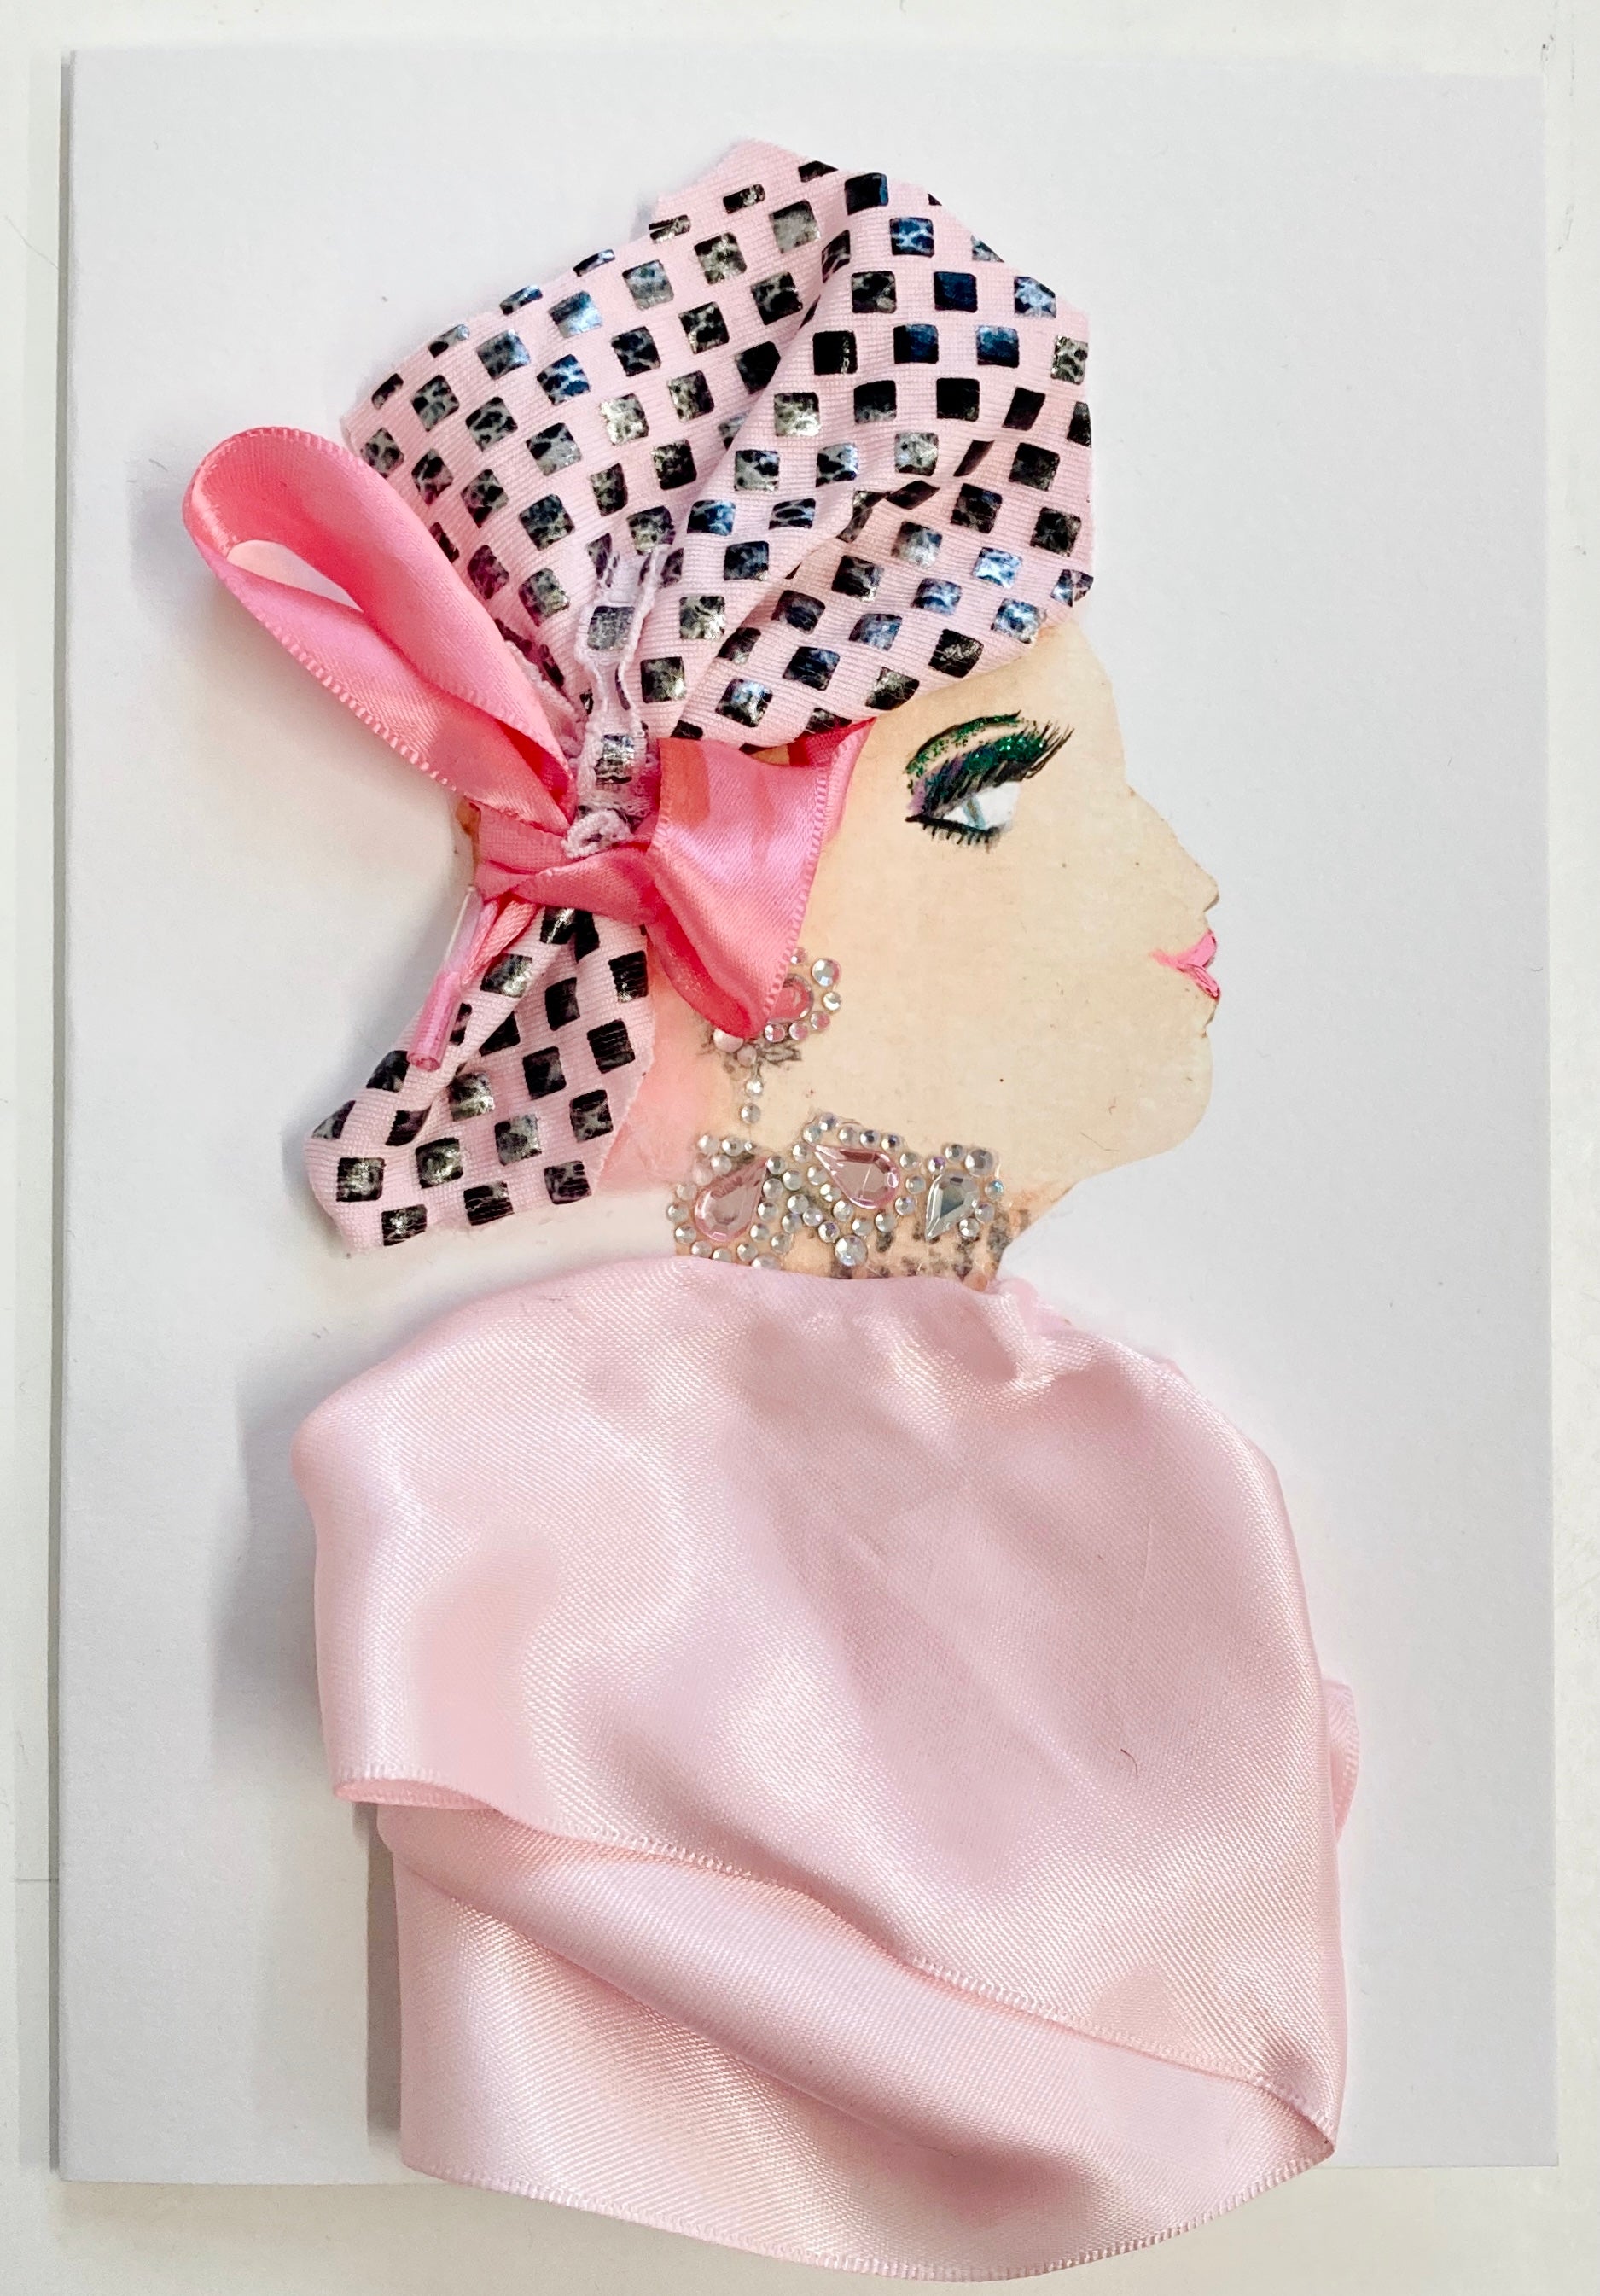 Peggy Paddington is accessorized with a light pink headpiece featuring silver diamanté squares and a hot pink bow, as well as a diamanté necklace and earrings.